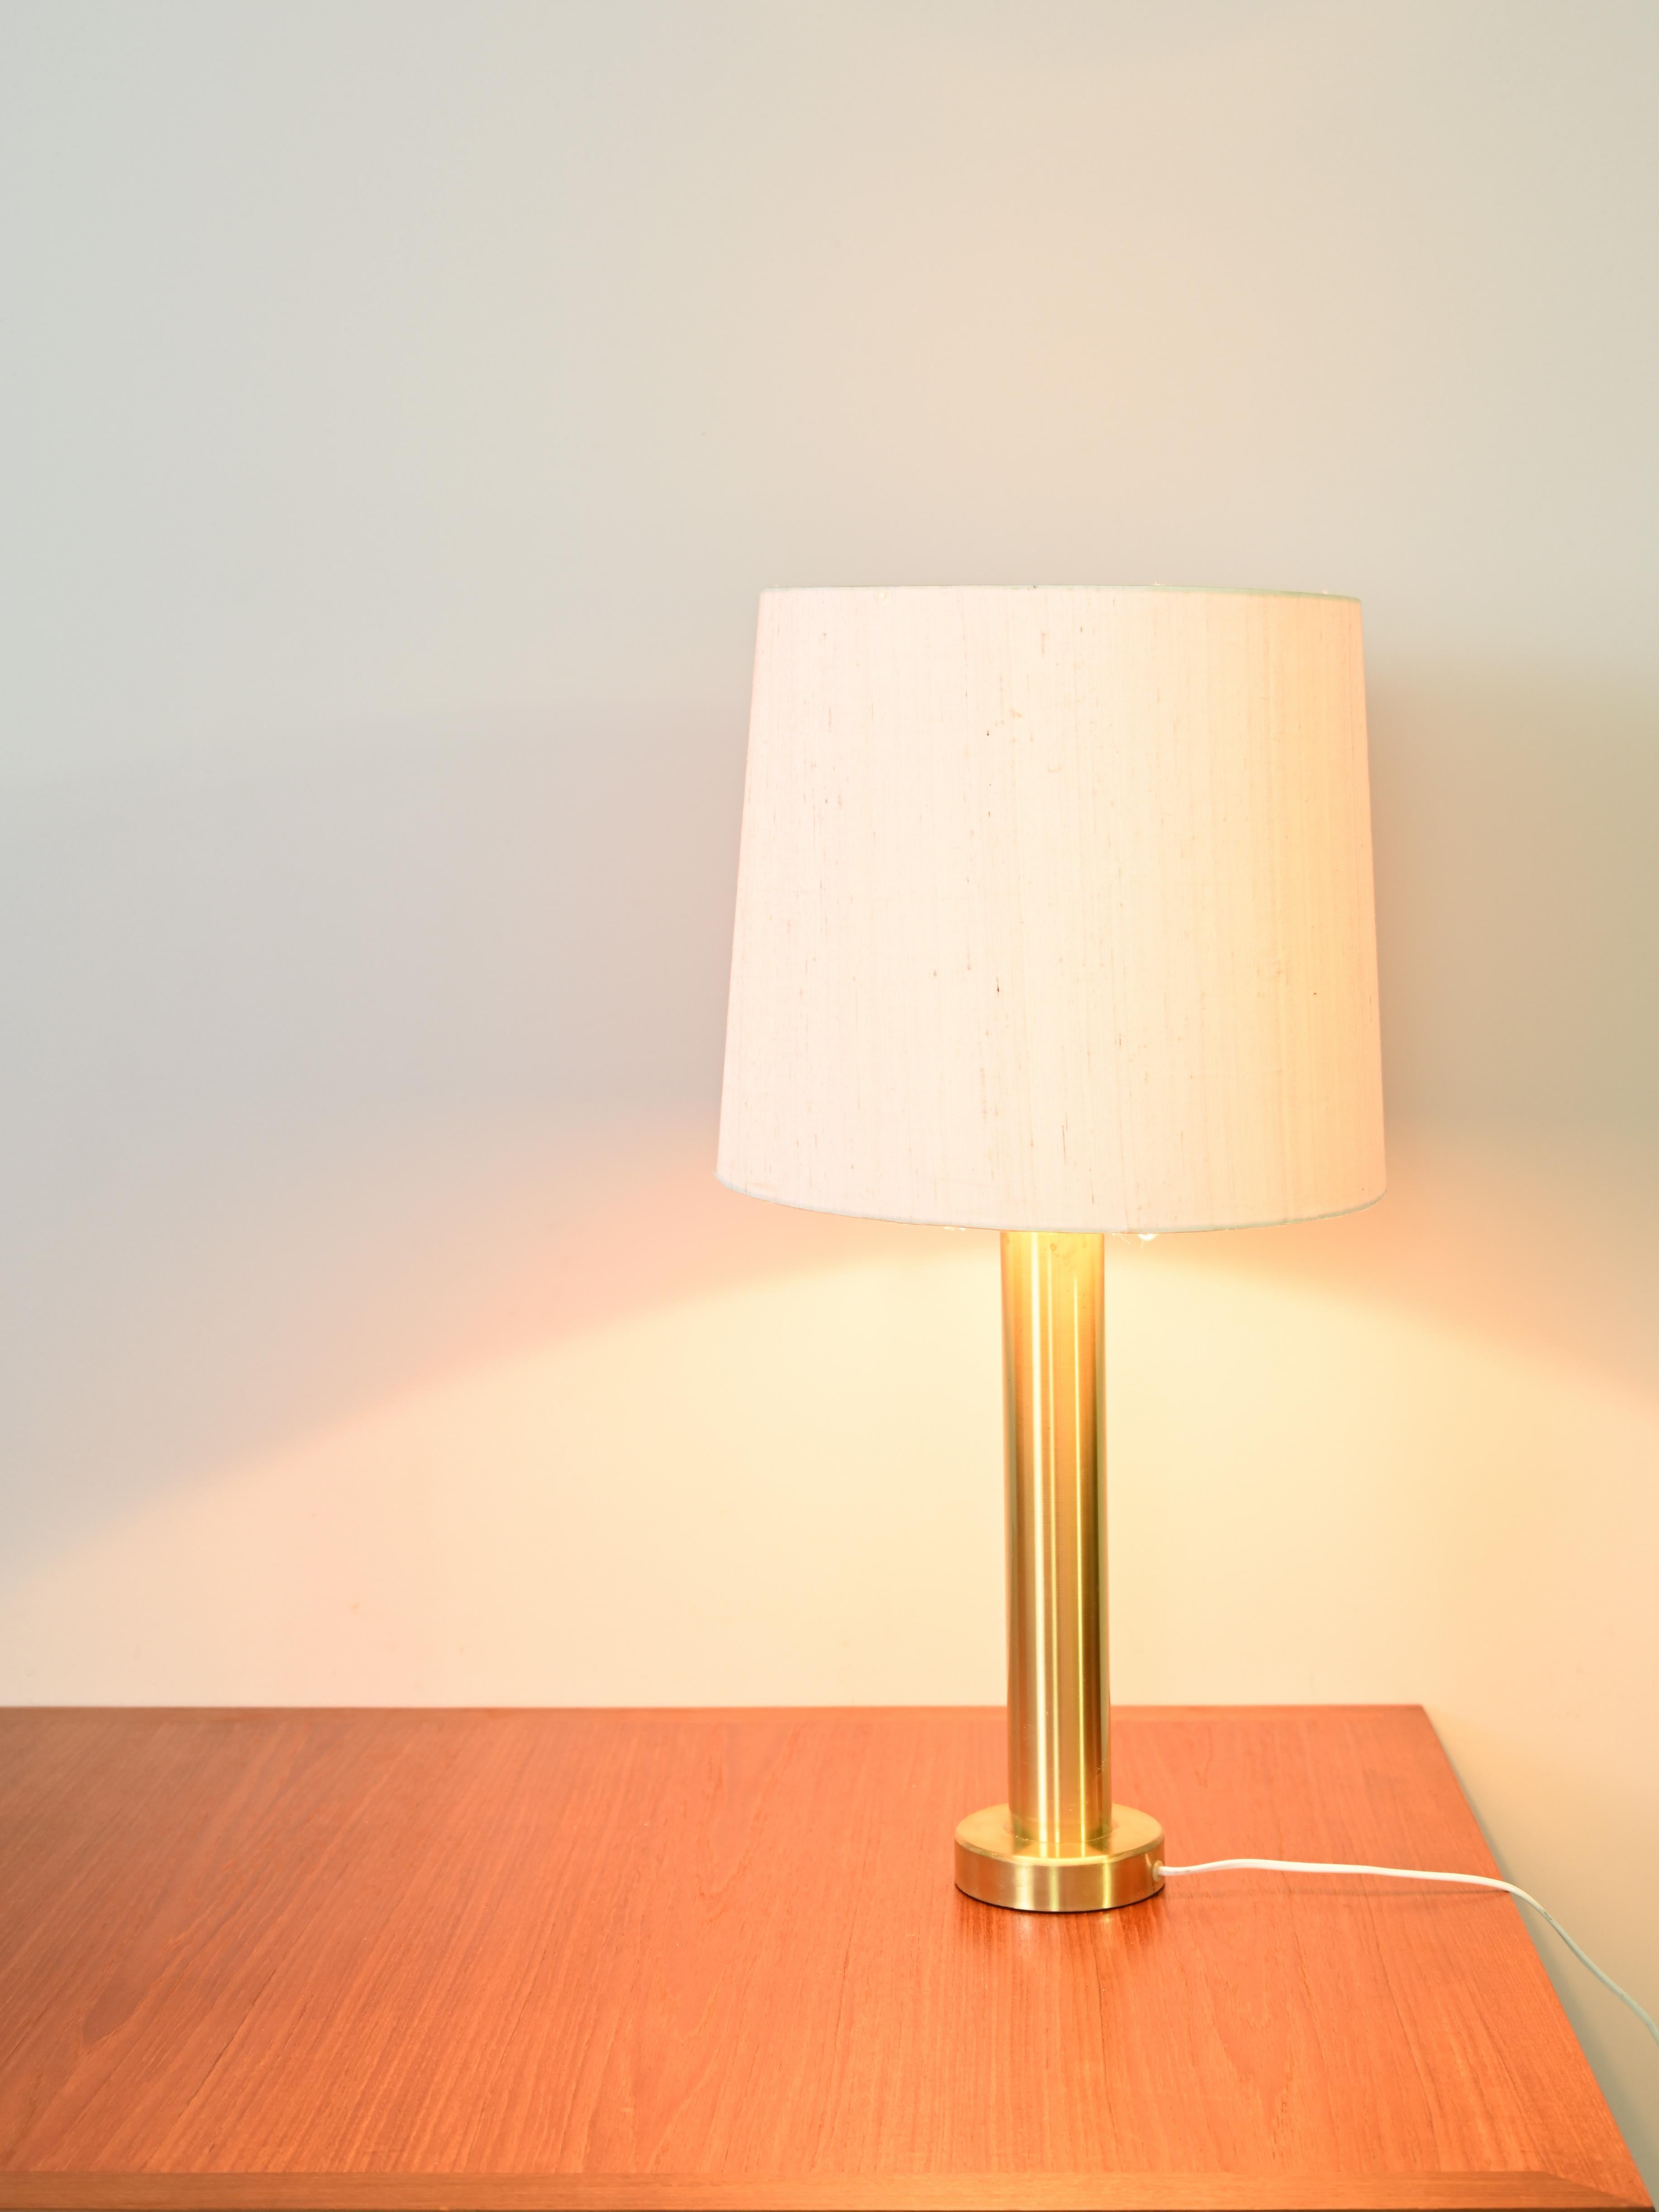 Elegant original vintage Scandinavian lamp from the 1960s.
 
A design piece of timeless beautElegant original vintage Scandinavian lamp from the 1960s.
 
A design piece of timeless beauty. 
Consists of the gilded metal base and fabric shade